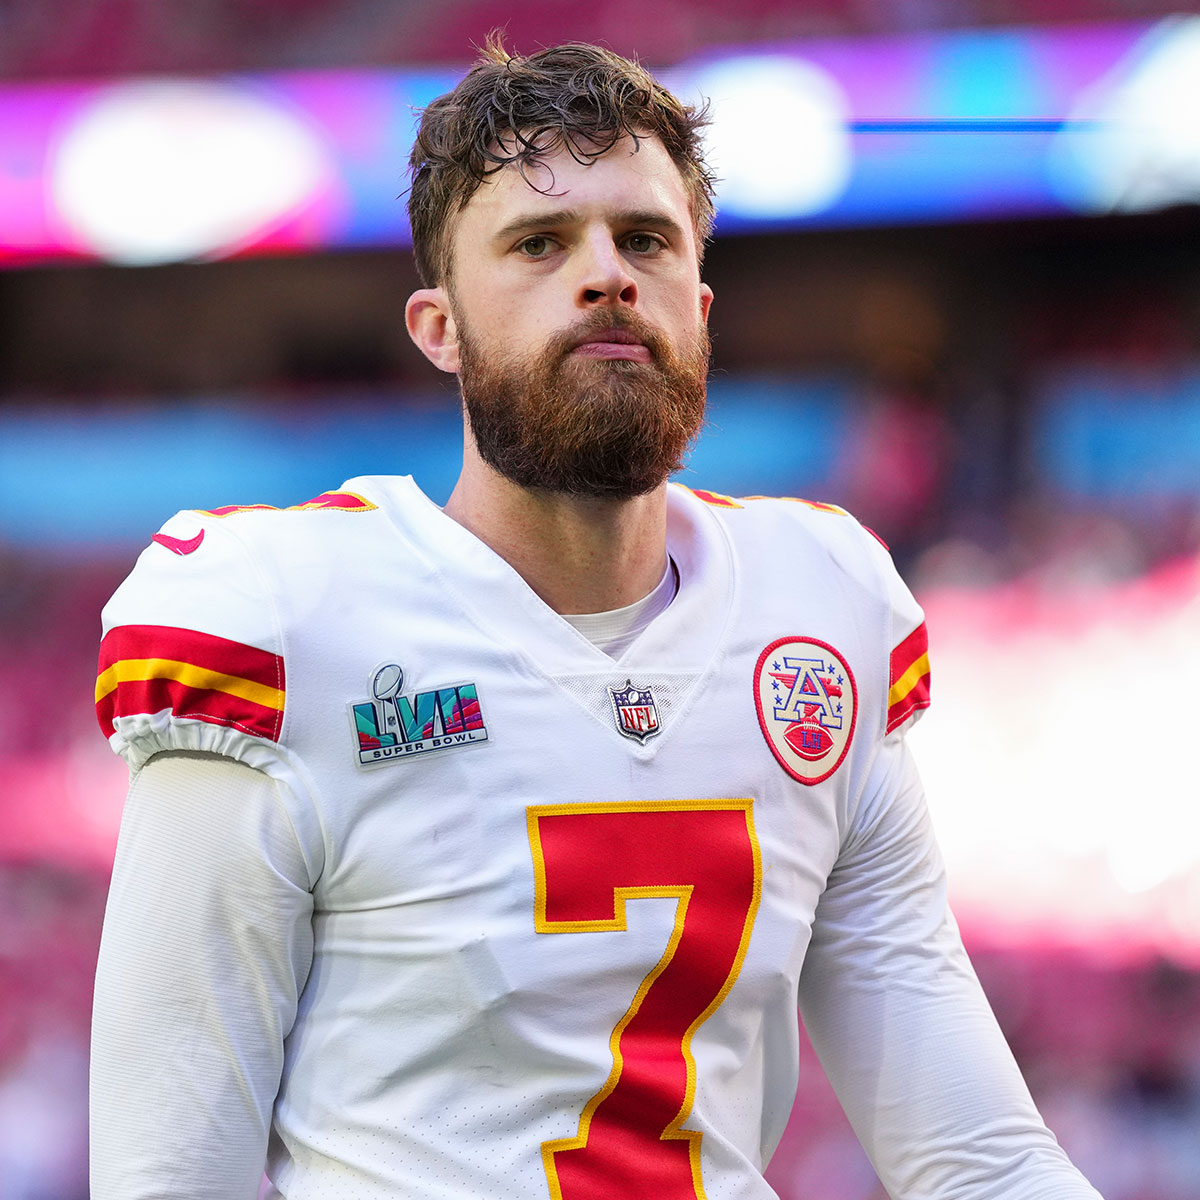 NFL's Harrison Butker References Taylor Swift in Controversial Speech